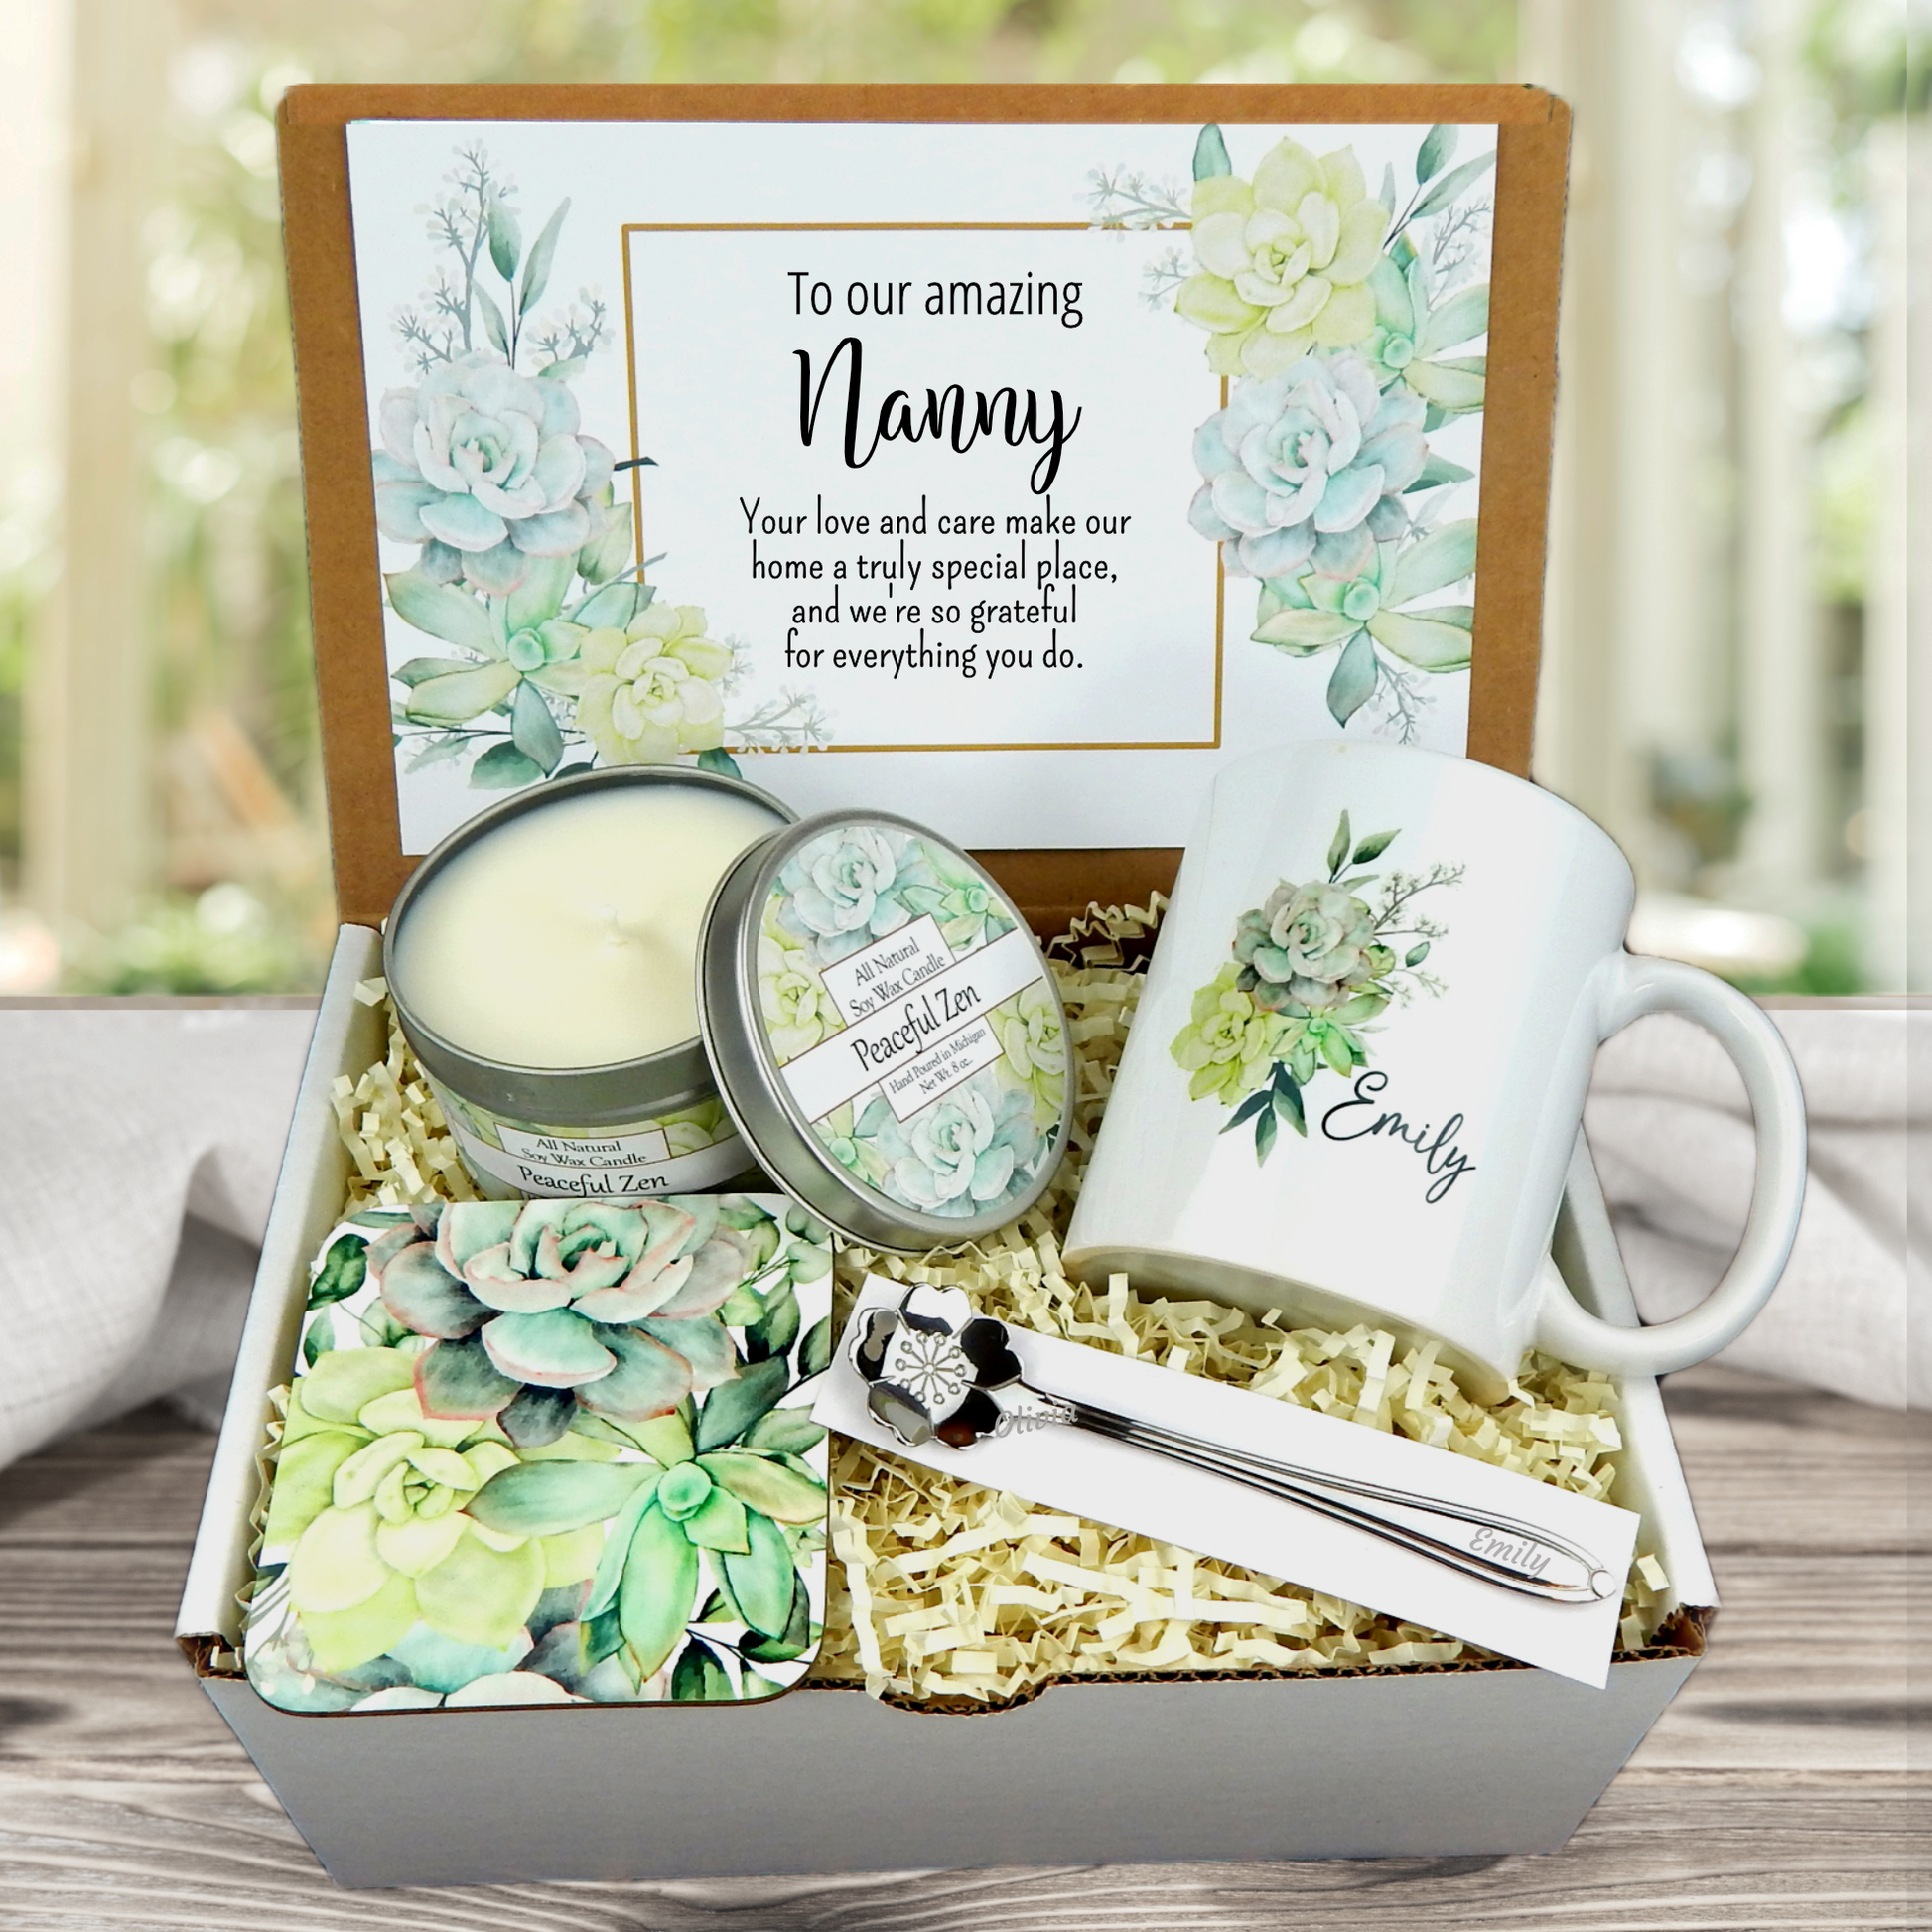 ThisWear Inspirational Gift for Nanny Nanny's Kitchen Full of Love